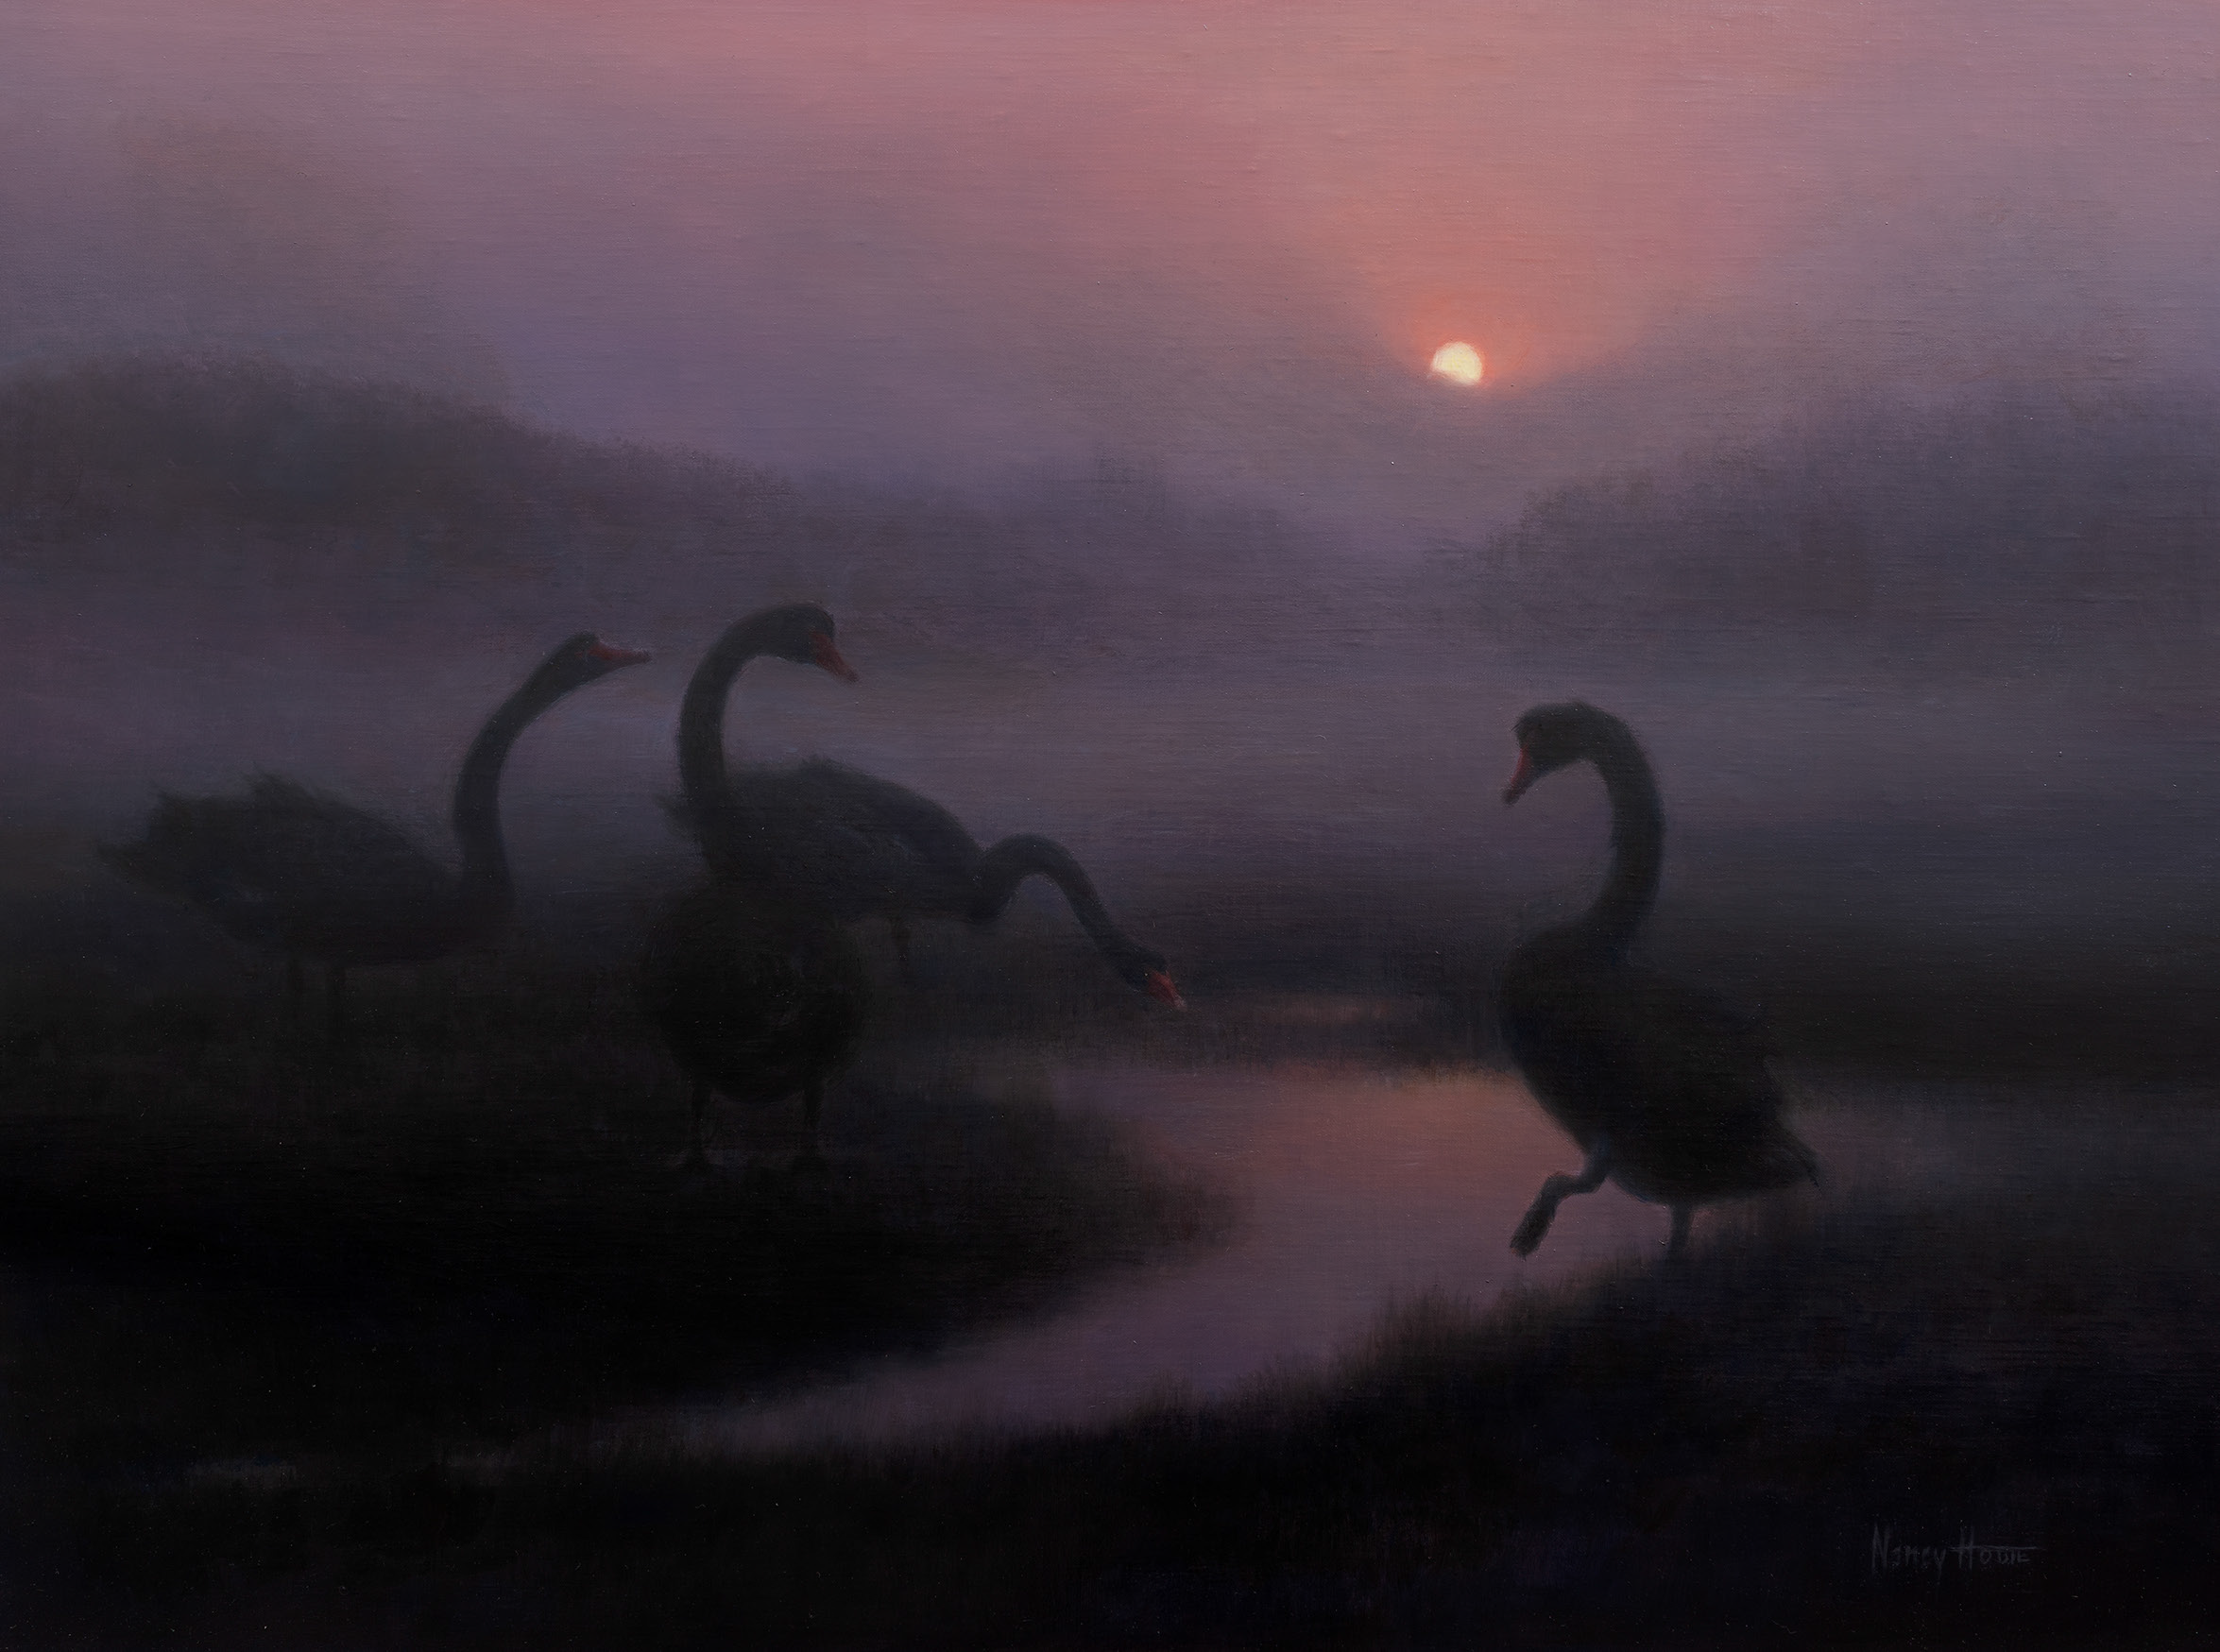 Silhouette of three birds with long necks in a misty marsh. Everything is dark purple due to the sun being so low in the horizon on a cloudy day.